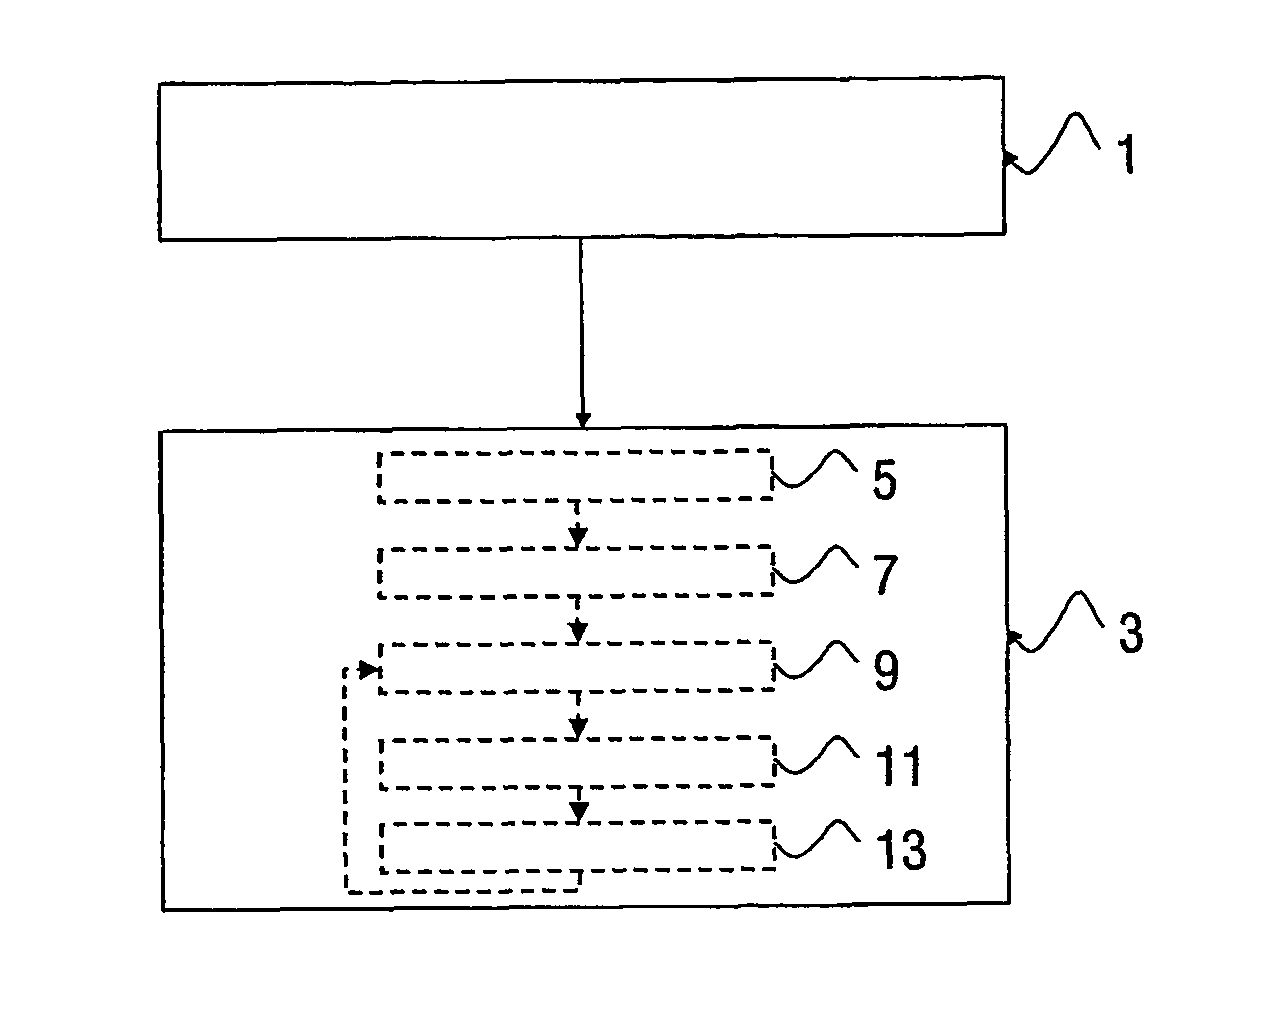 Method and electronic device for reducing size of an electronic collection of media elements